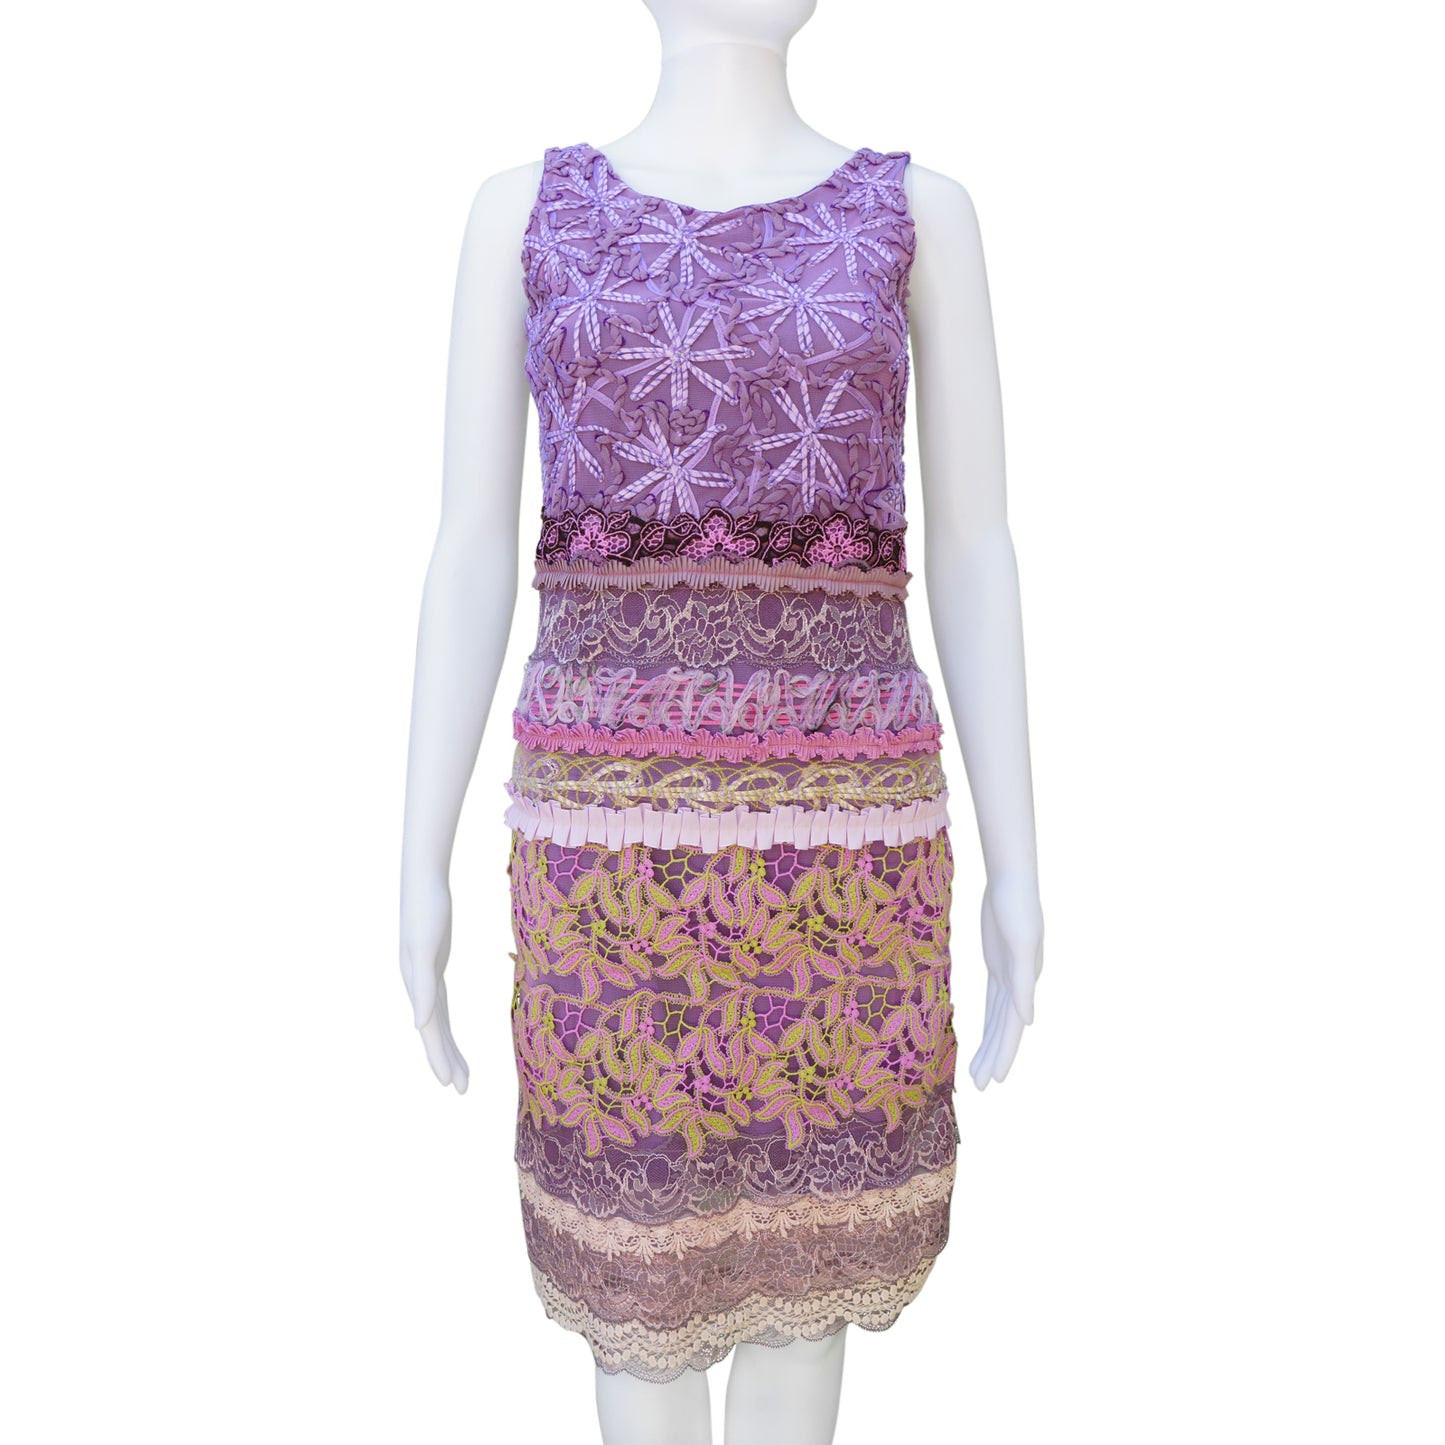 SAVE THE QUEEN PURPLE EMBROIDERED SLEEVELESS COCKTAIL NIGHT OUT DRESS - leefluxury.com